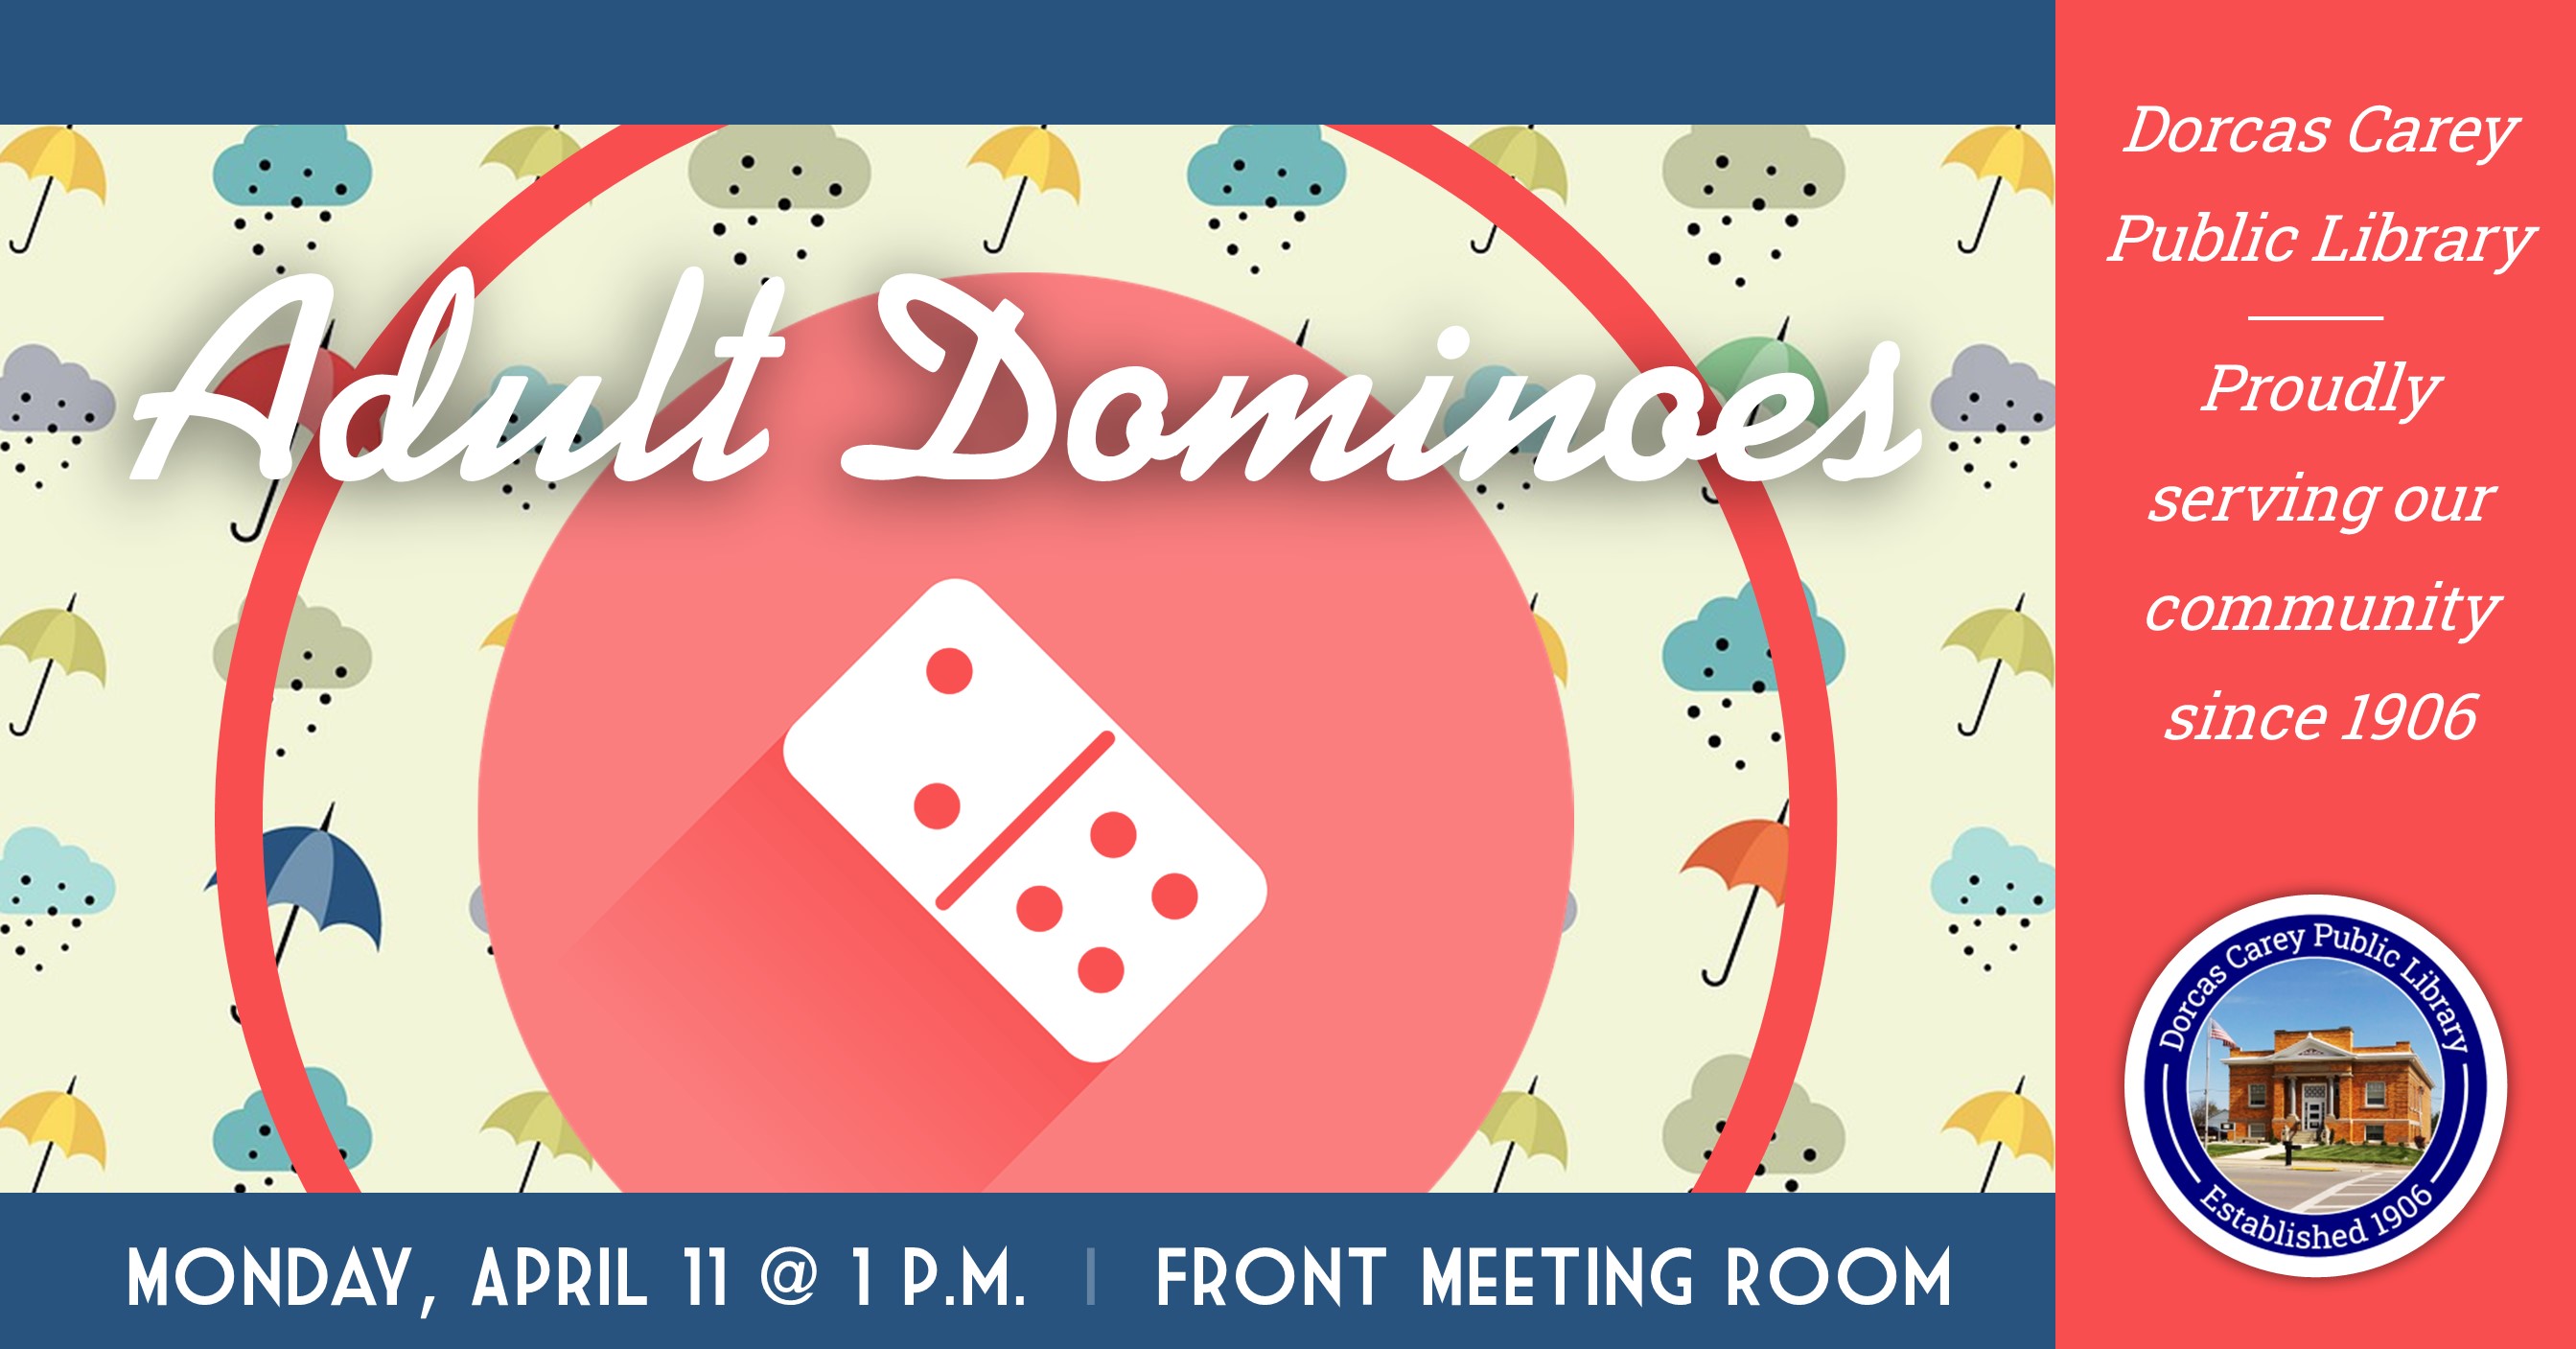 Monday, April 11th – Adult Domino Club – 1:00 p.m. Join us at 1:00 p.m. on Monday, April 11th for Dominoes. Come enjoy the laughter and fun while strategizing your next play!